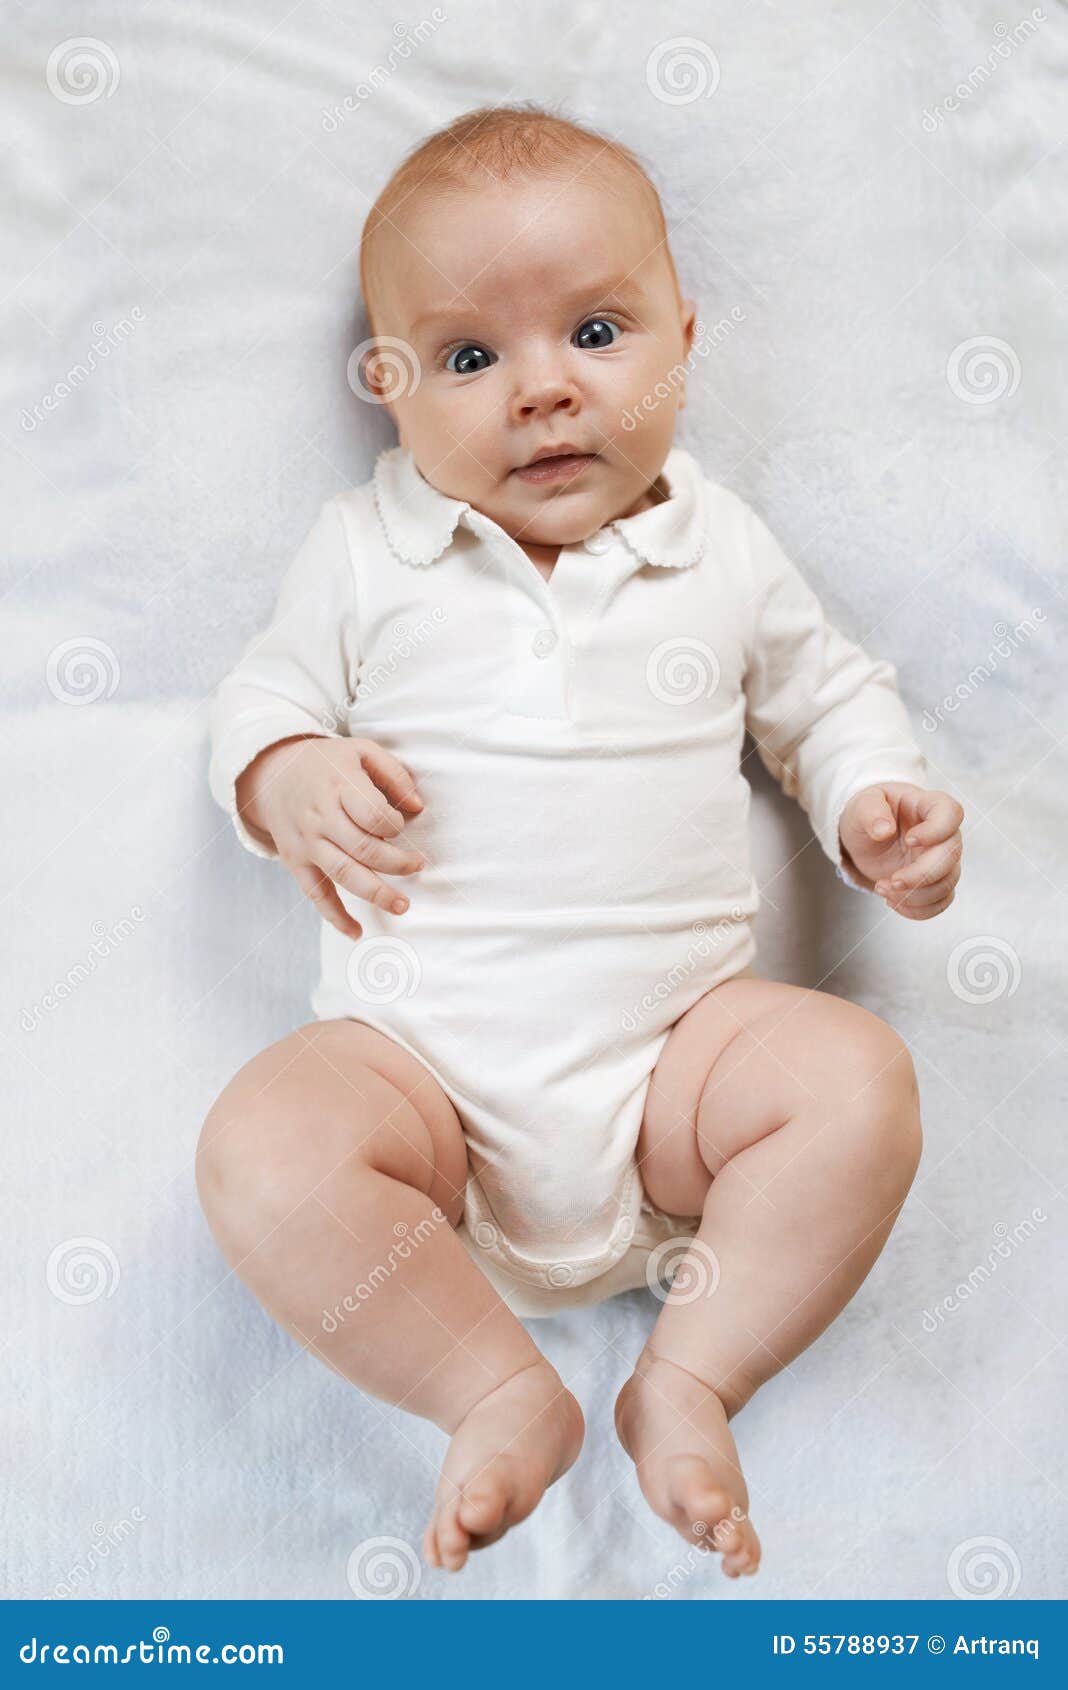 Surprised baby on diaper stock image. Image of suckling - 55788937